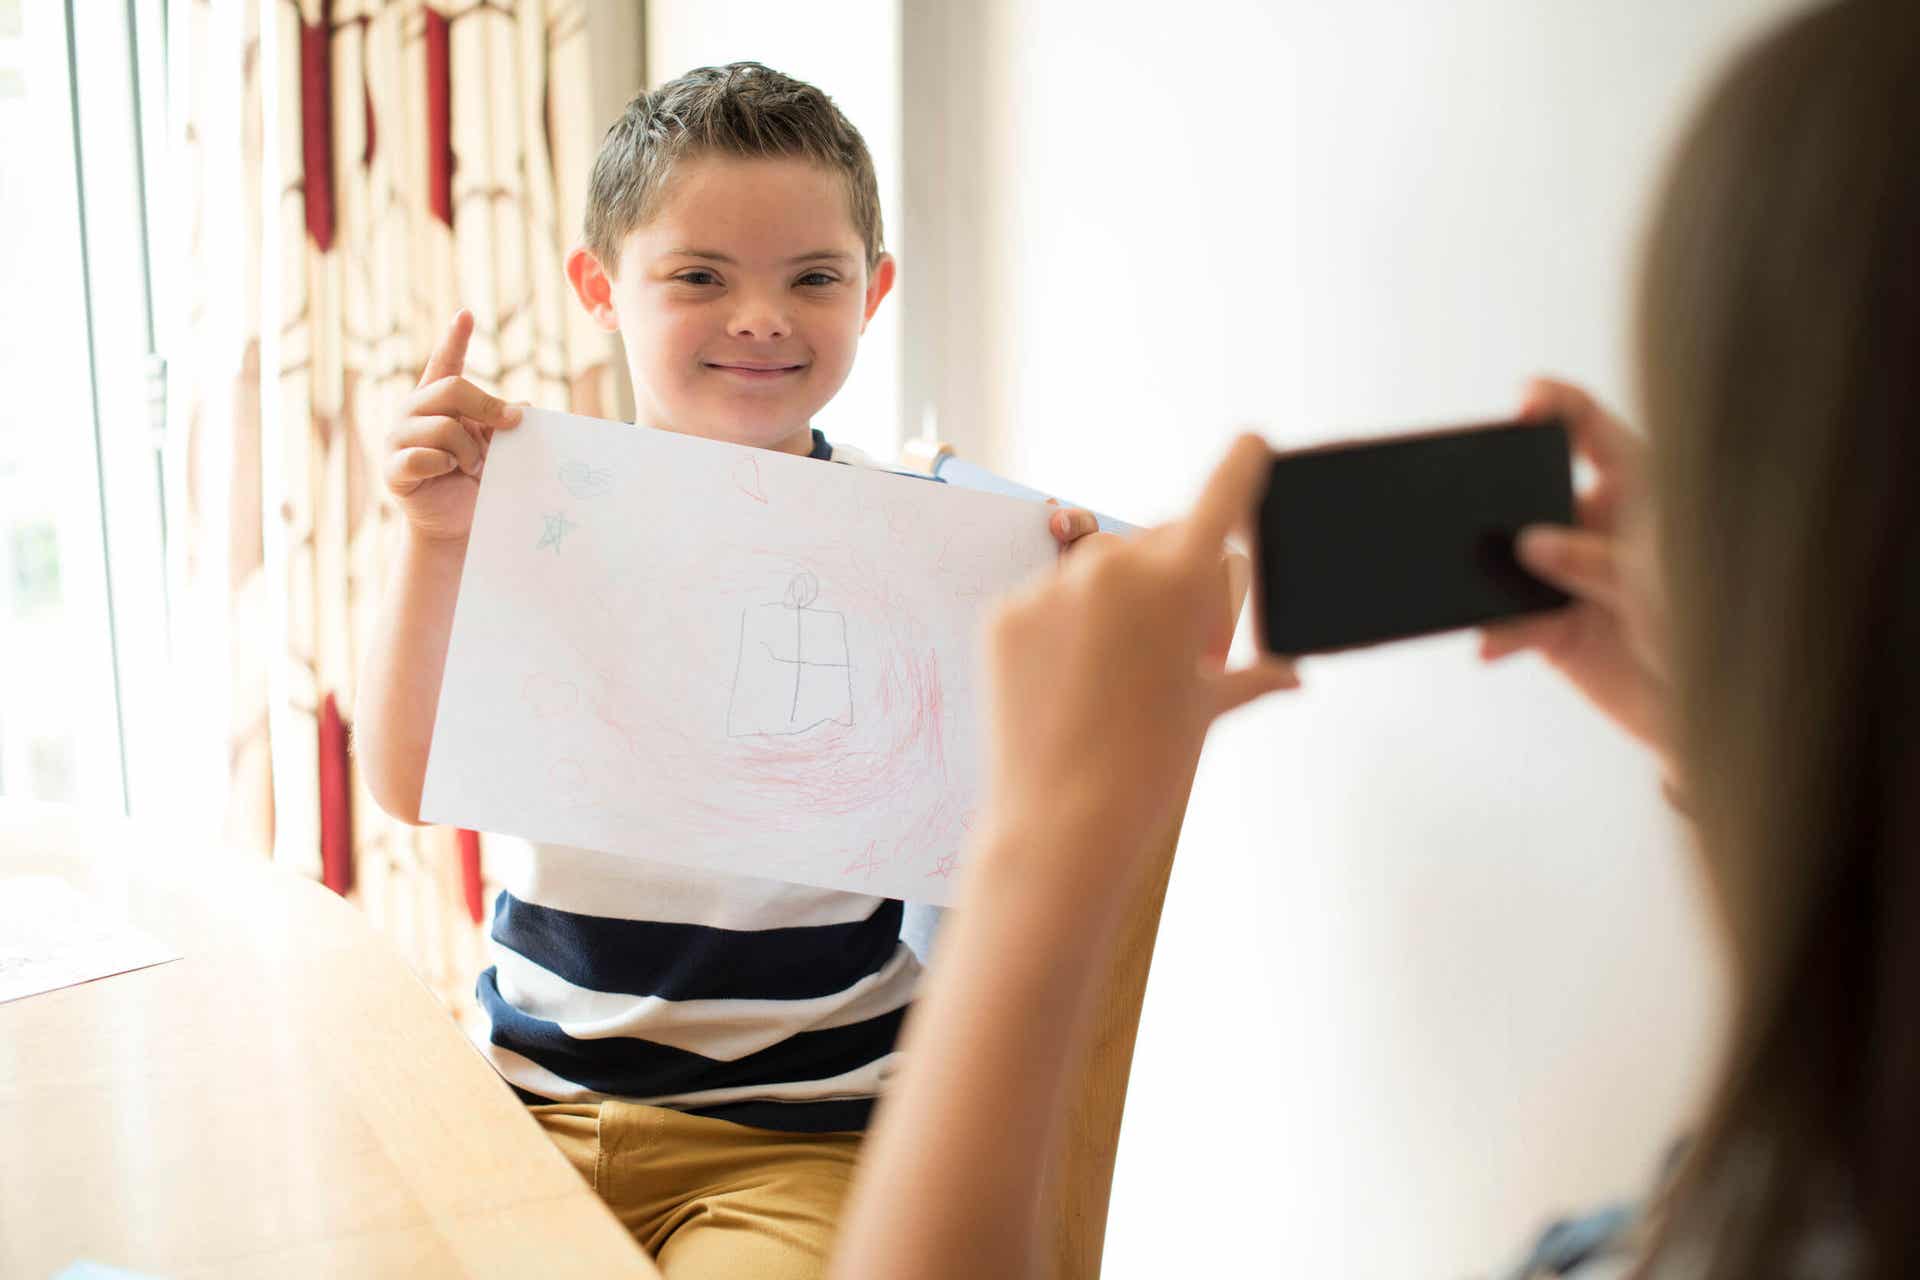 A boy with down syndrome holding up his drawing while his mom takes a picture.